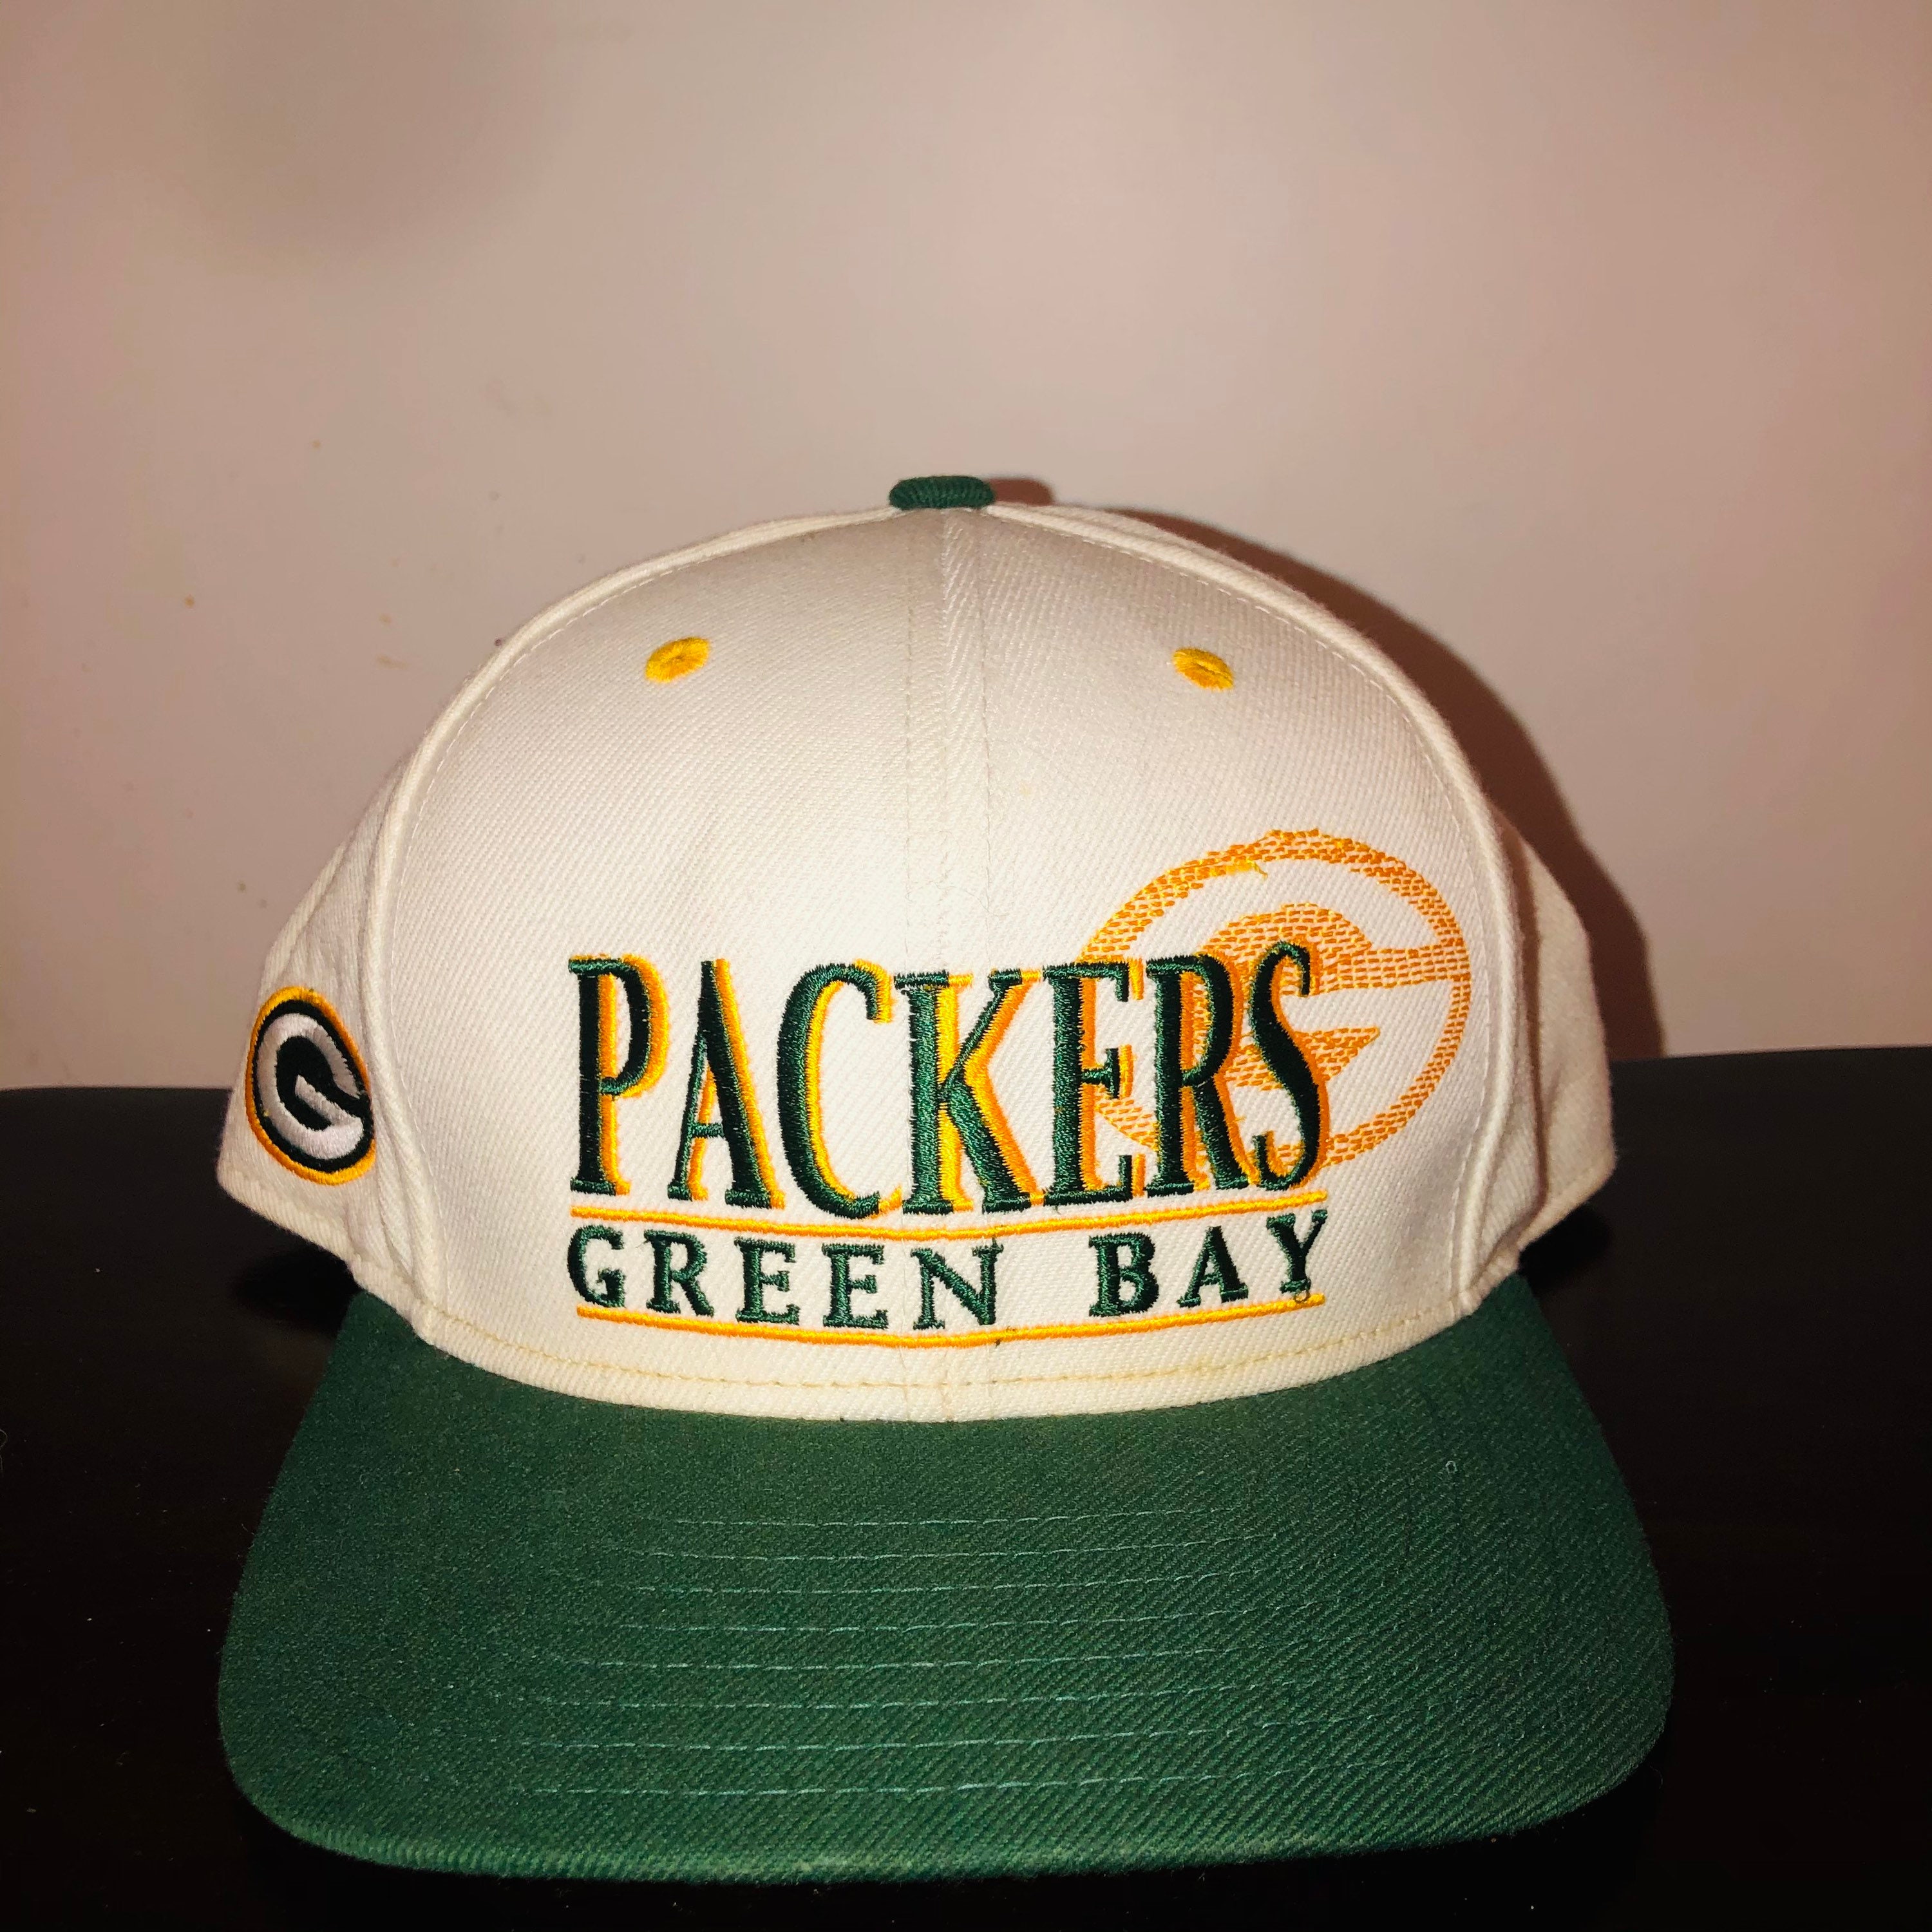 Green Bay Packers vintage SnapBack white green hat. | Etsy